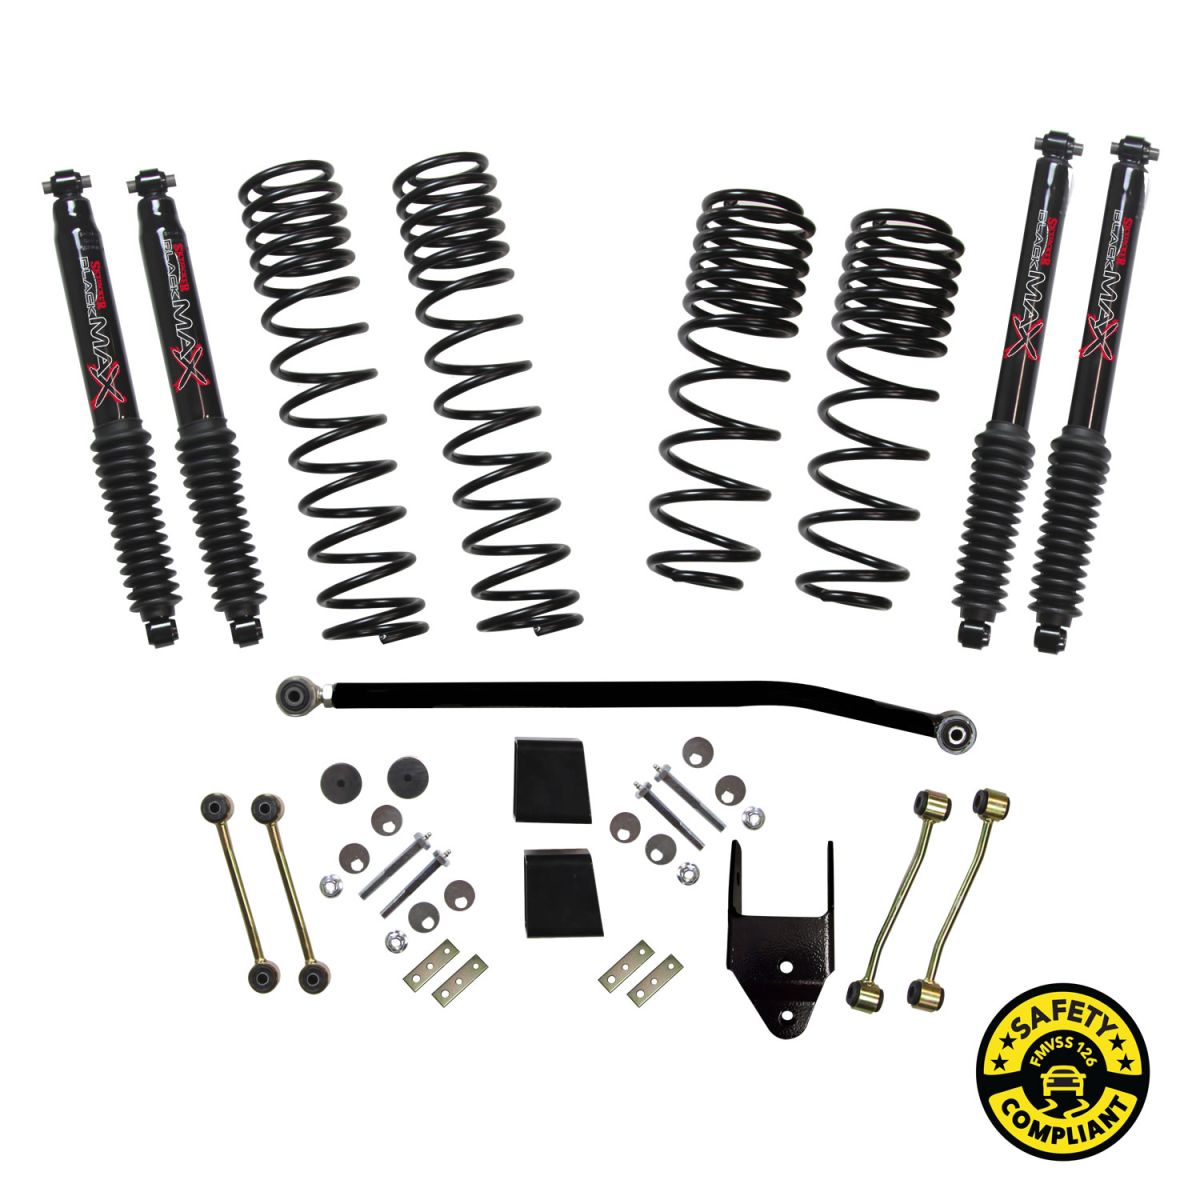 Skyjacker Suspension - Skyjacker Dual Rate Long Travel 3.5-4" Lift Kit System with Black MAX Shocks For 18-20 Jeep Wrangler JL Rubicon Unlimited Four Door